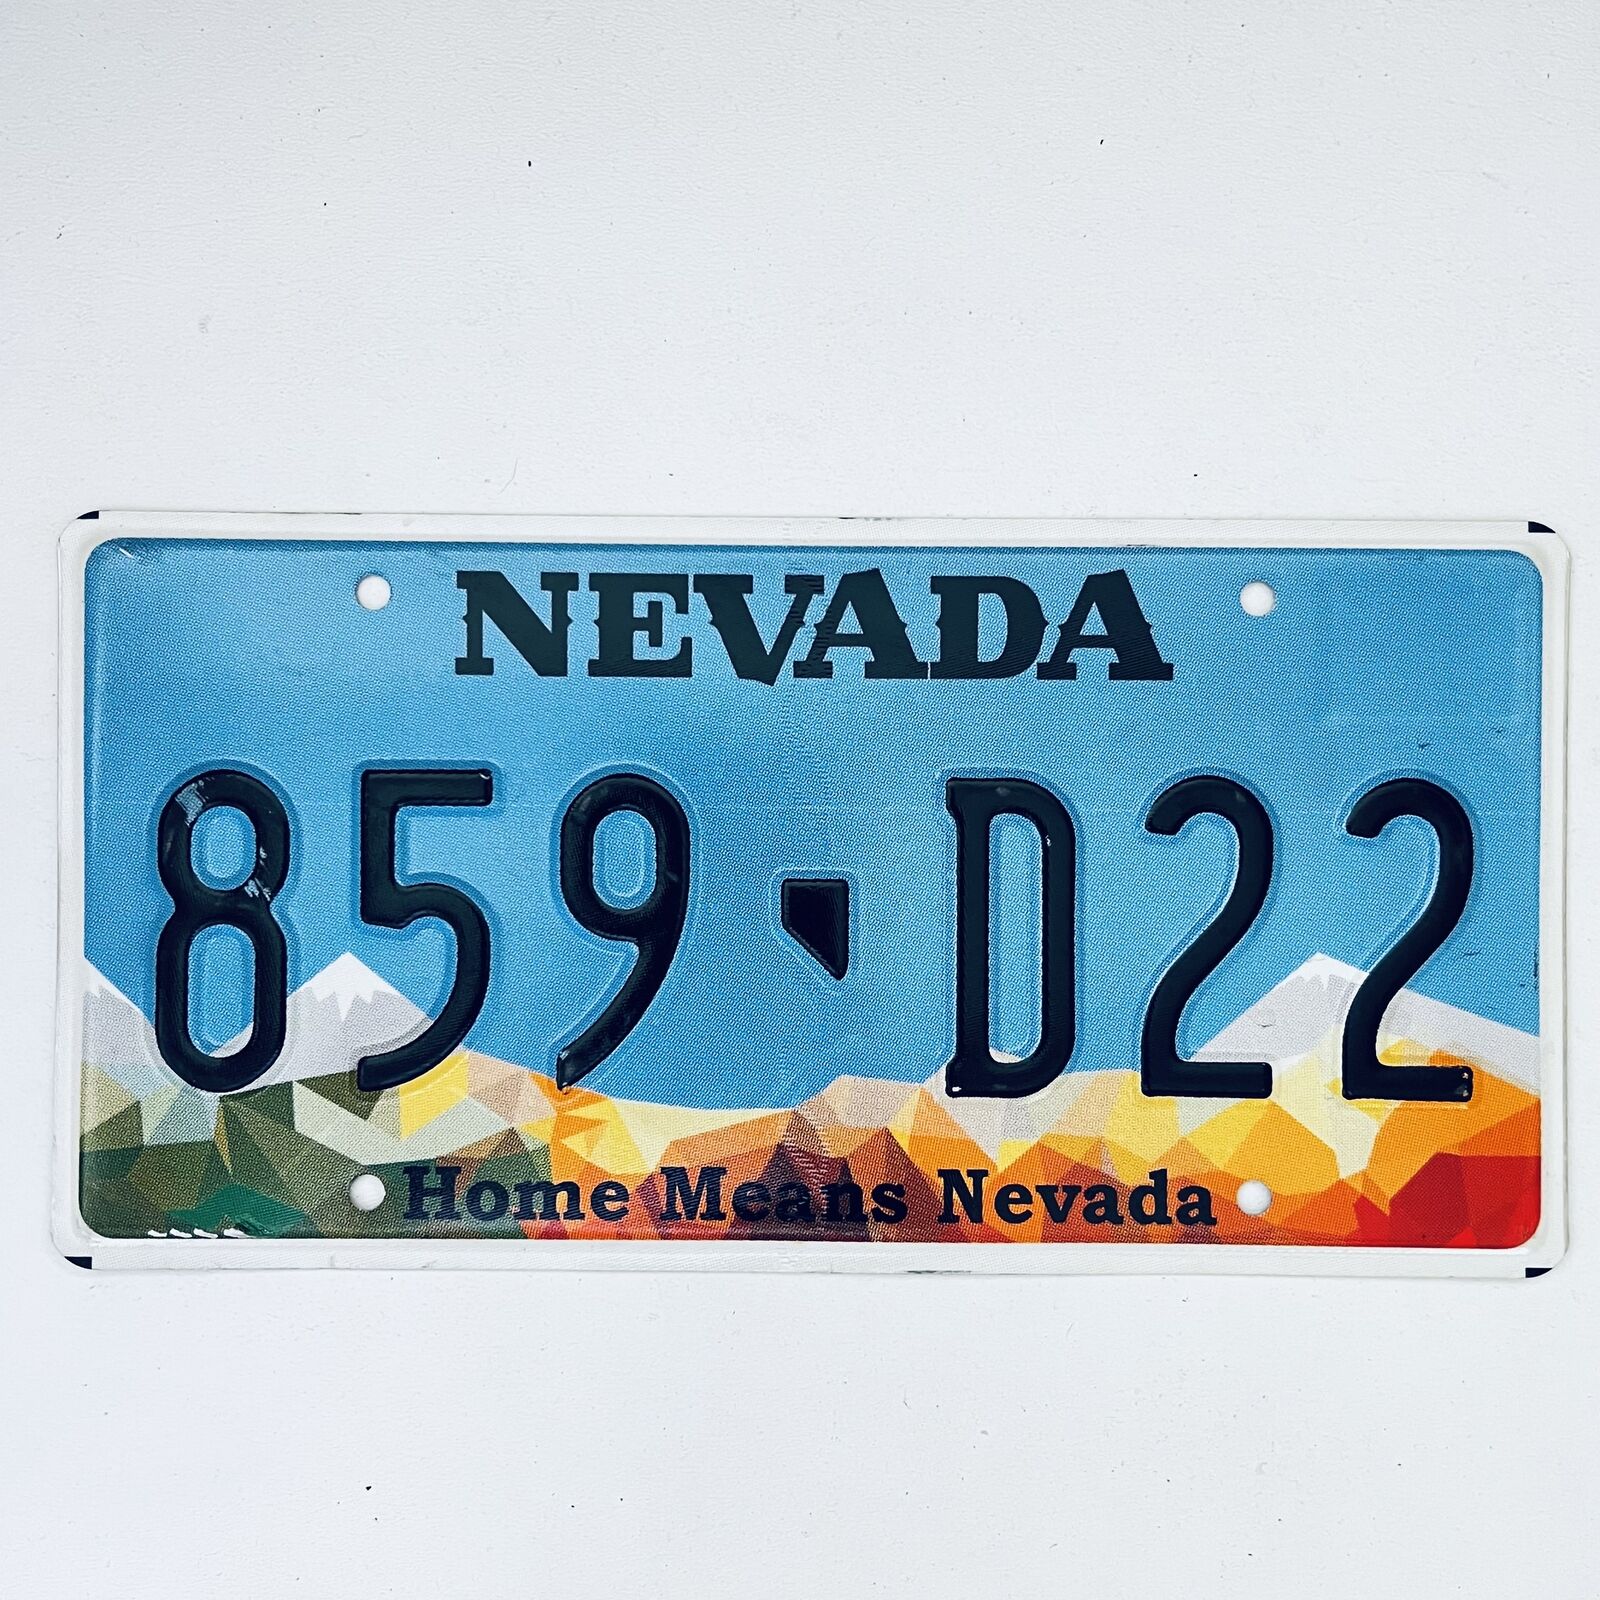  United States Nevada Home Means Nevada Passenger License Plate 859 D22